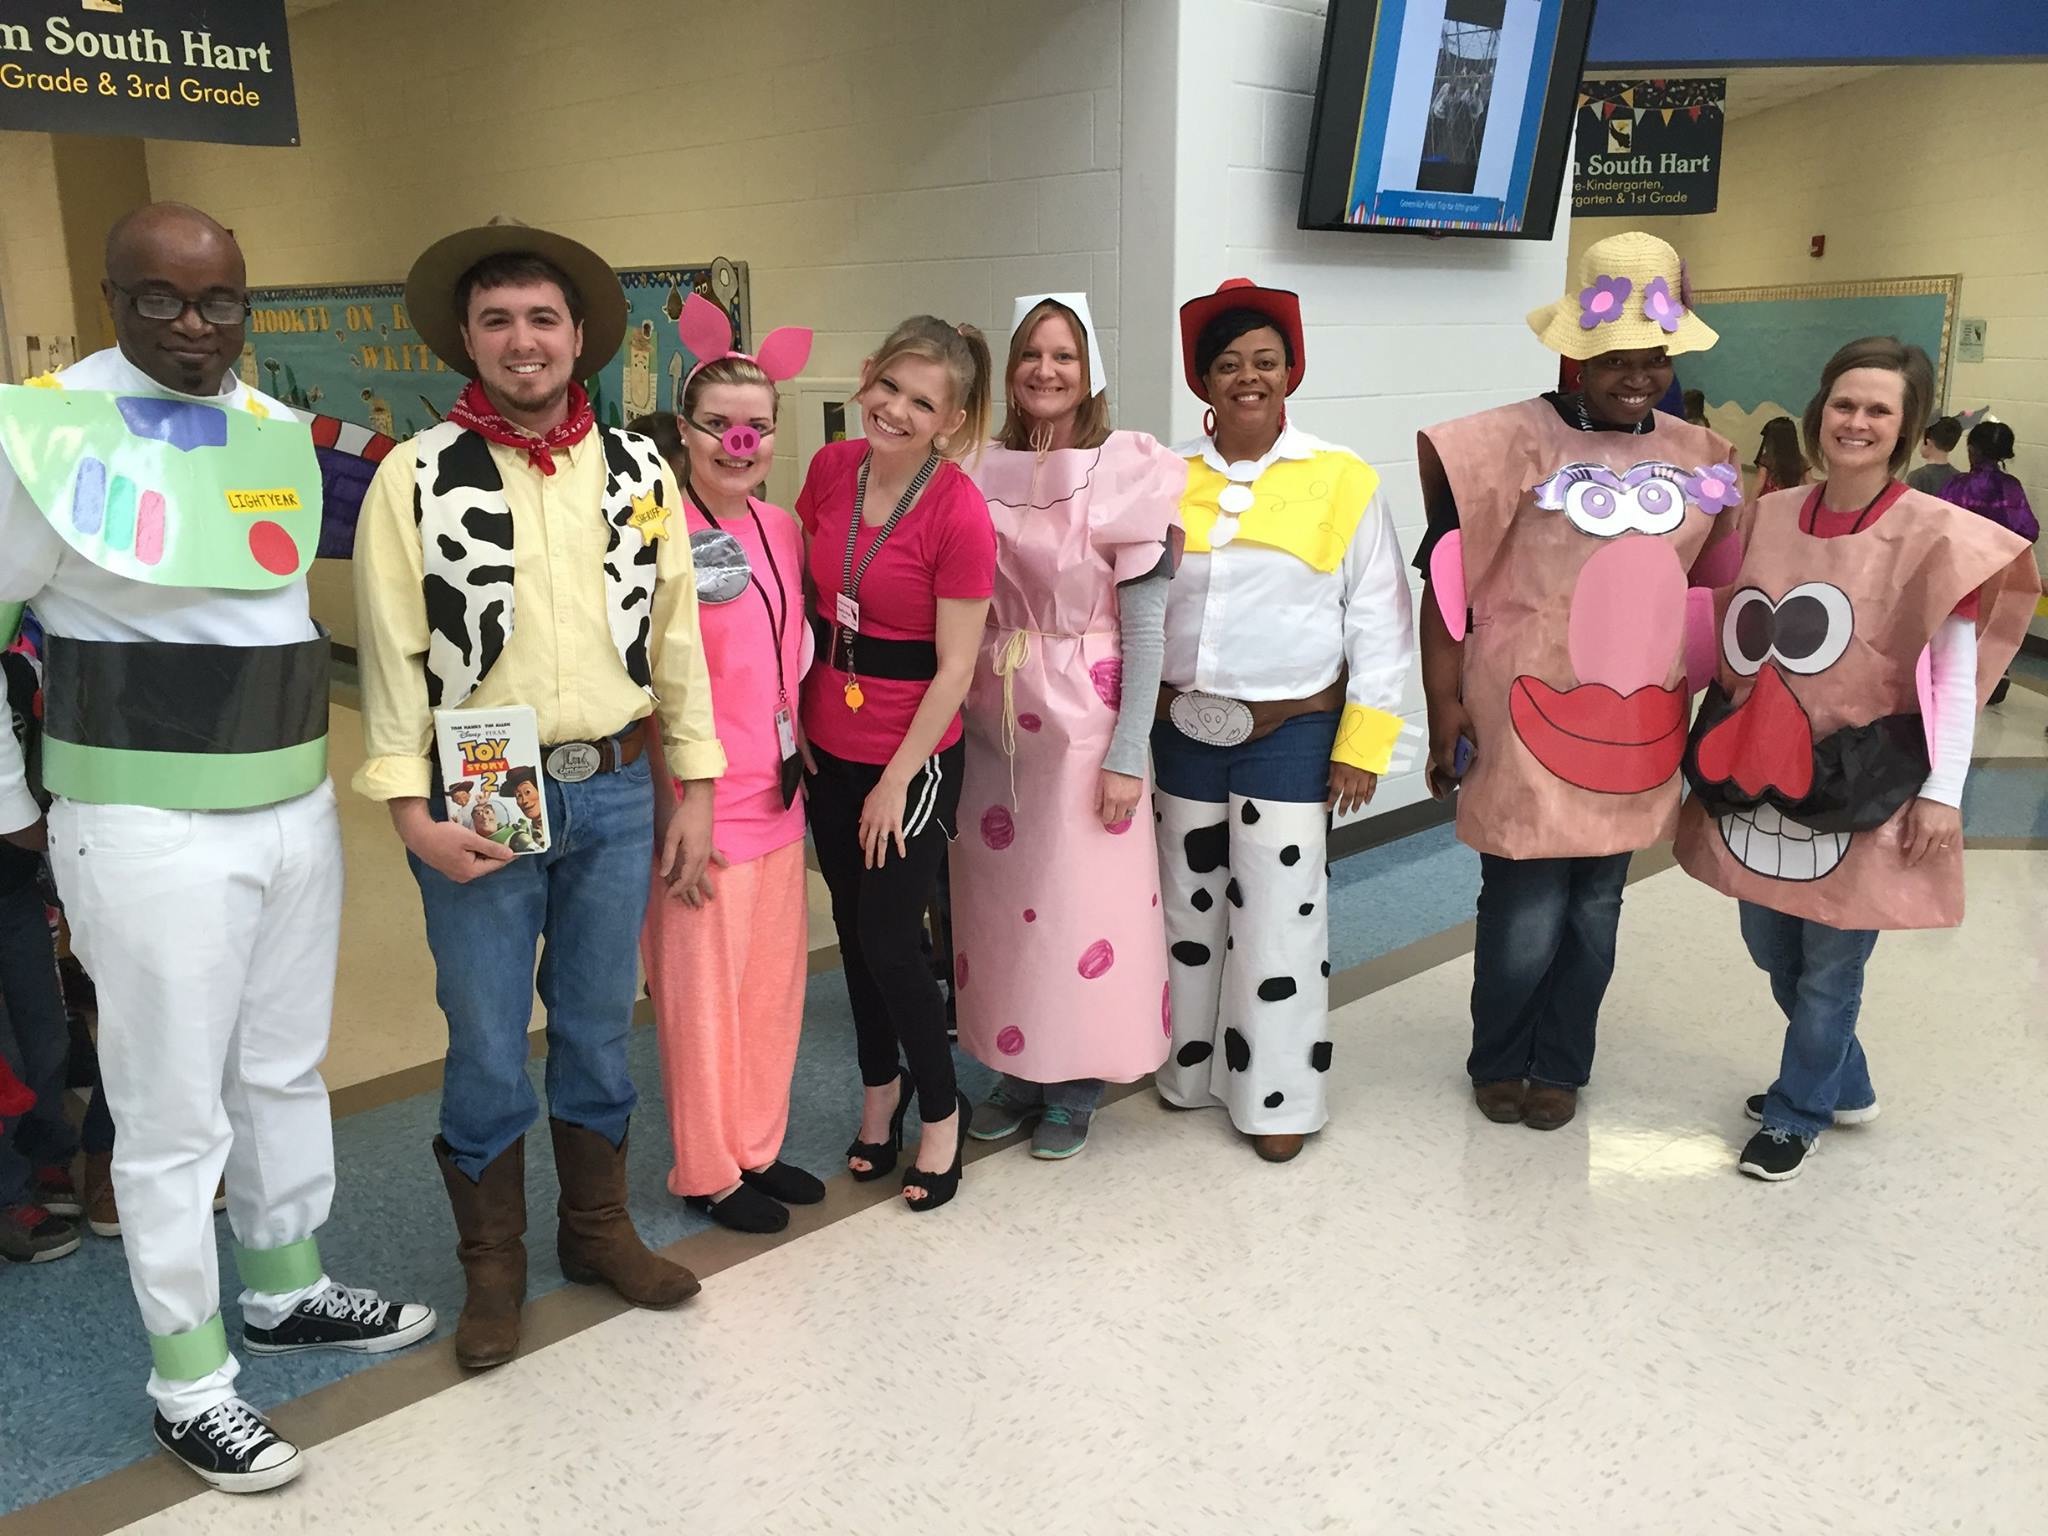 List of Best Ever Grade Level Costumes - Toy Story Teacher Costumes